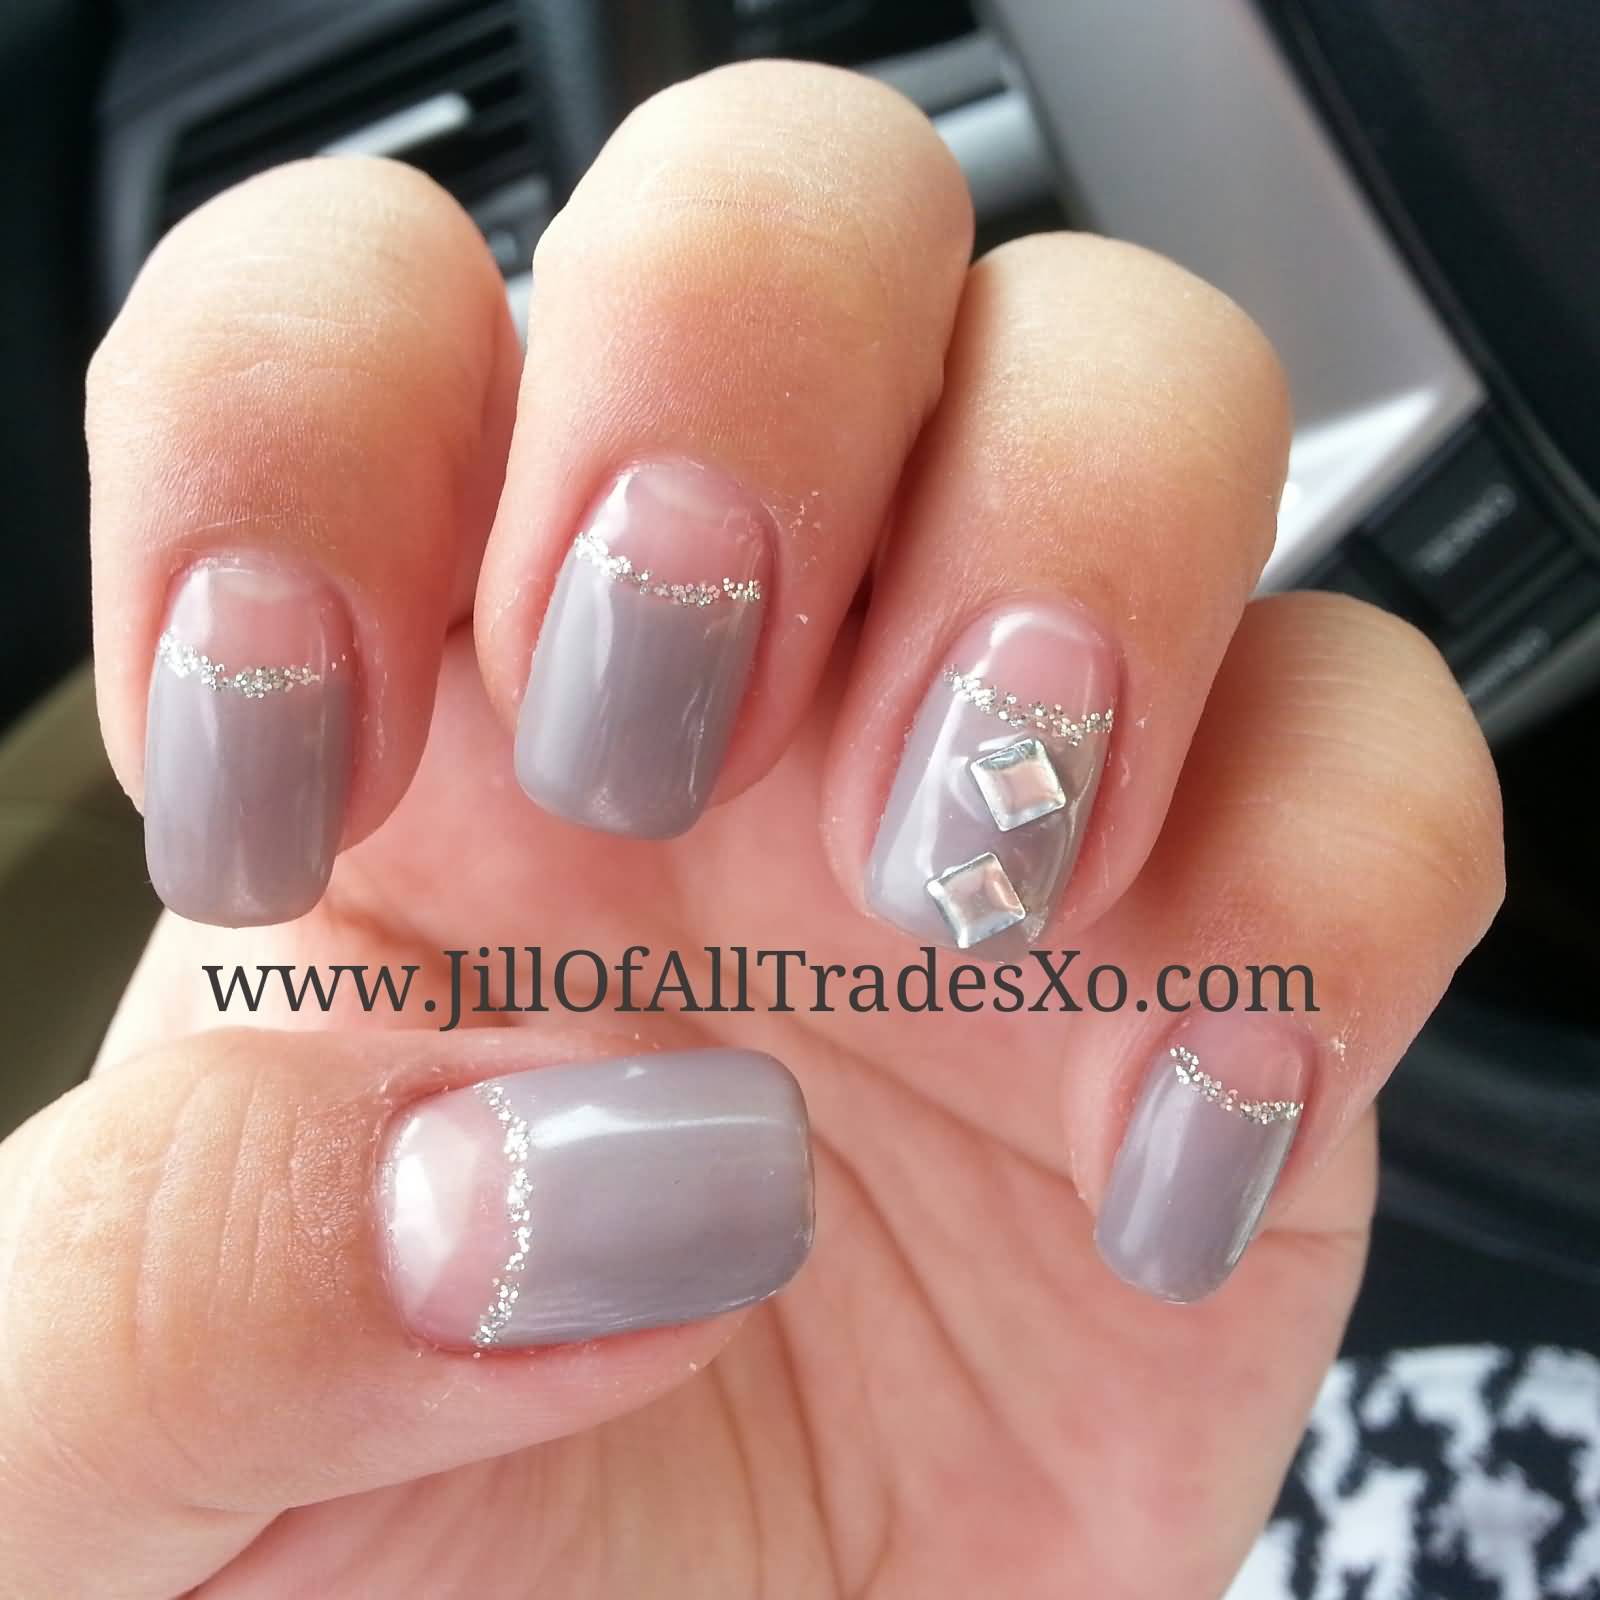 Grey Nails With Half Moon Nail Design And Studs Design